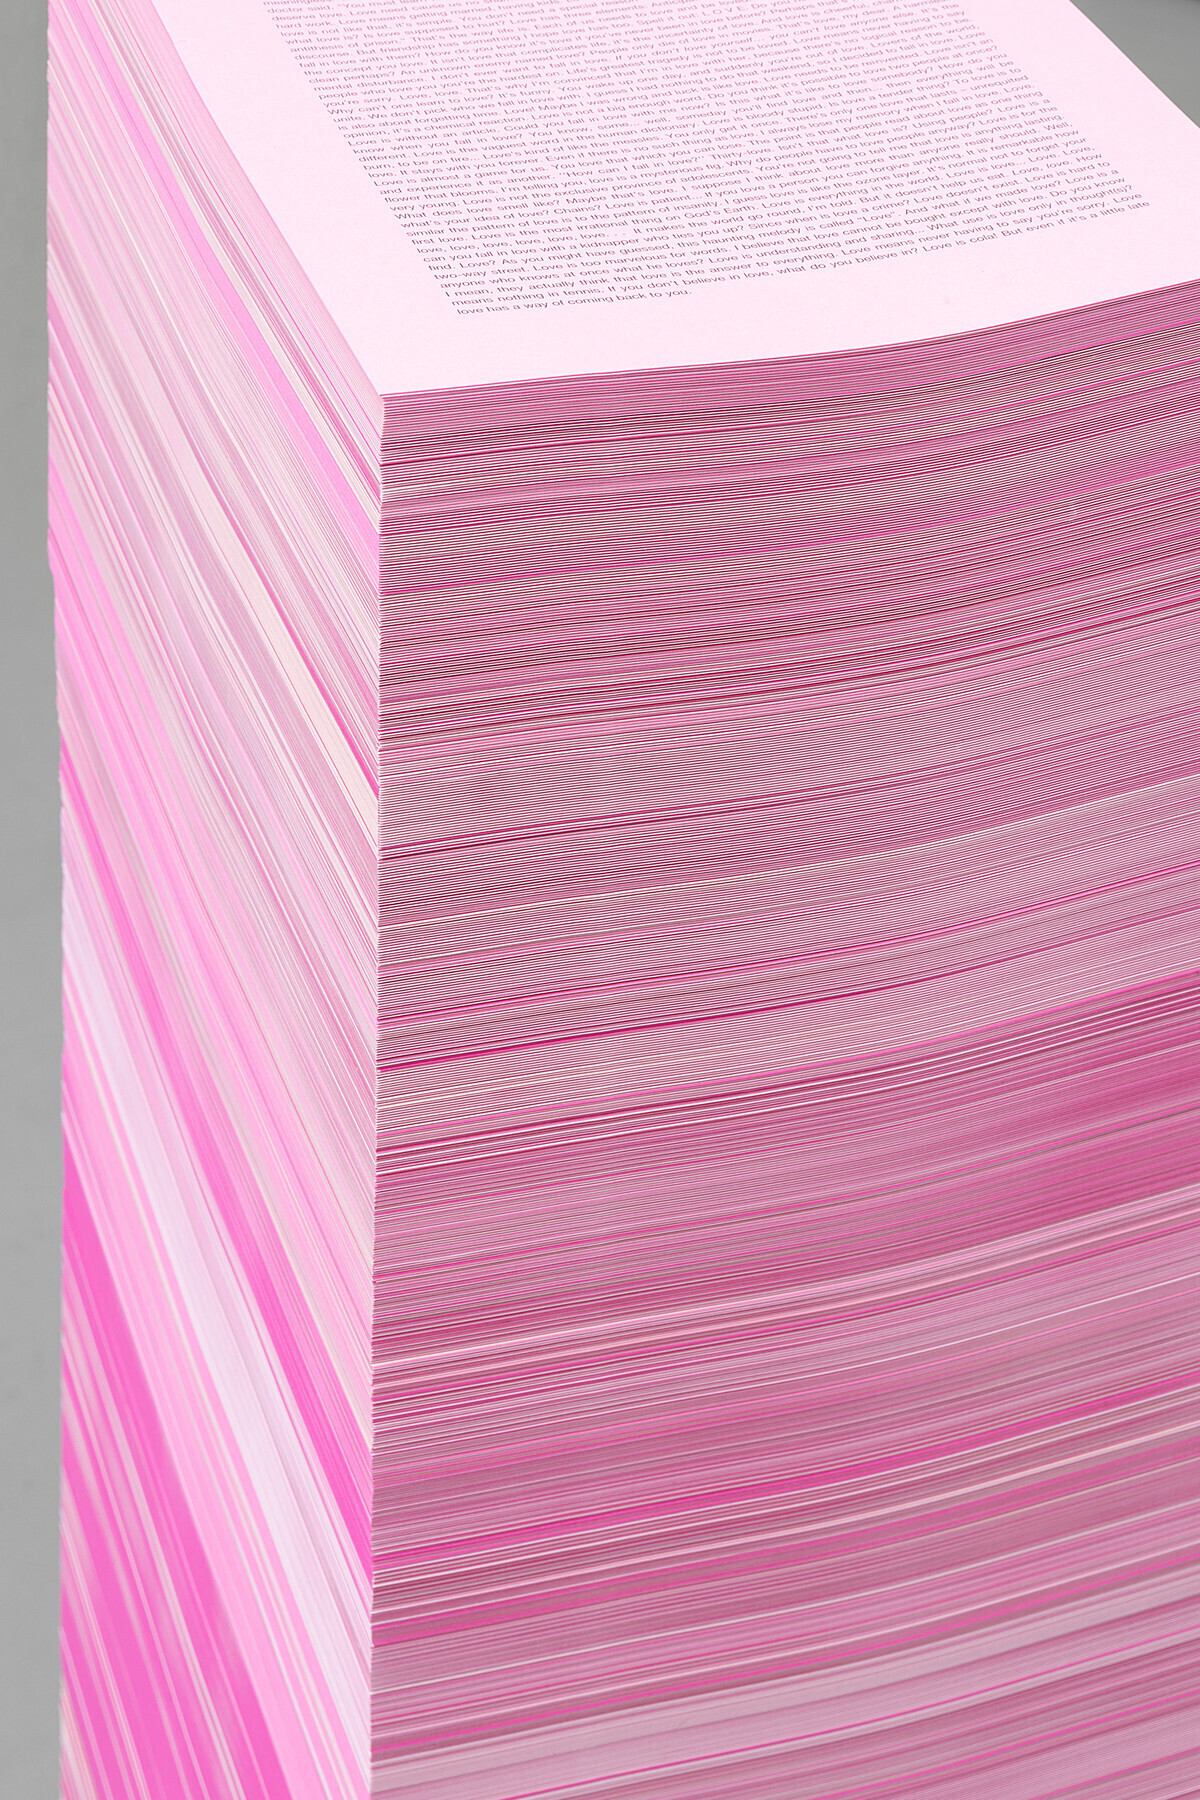 Robin Waart: (The loves that didn´t make it), 2020. 160 reclaimed subtitles including the word love, offset on six different shades of pink paper, 90 x 29.7 x 21 cm. With kind support by the Mondriaan Fund